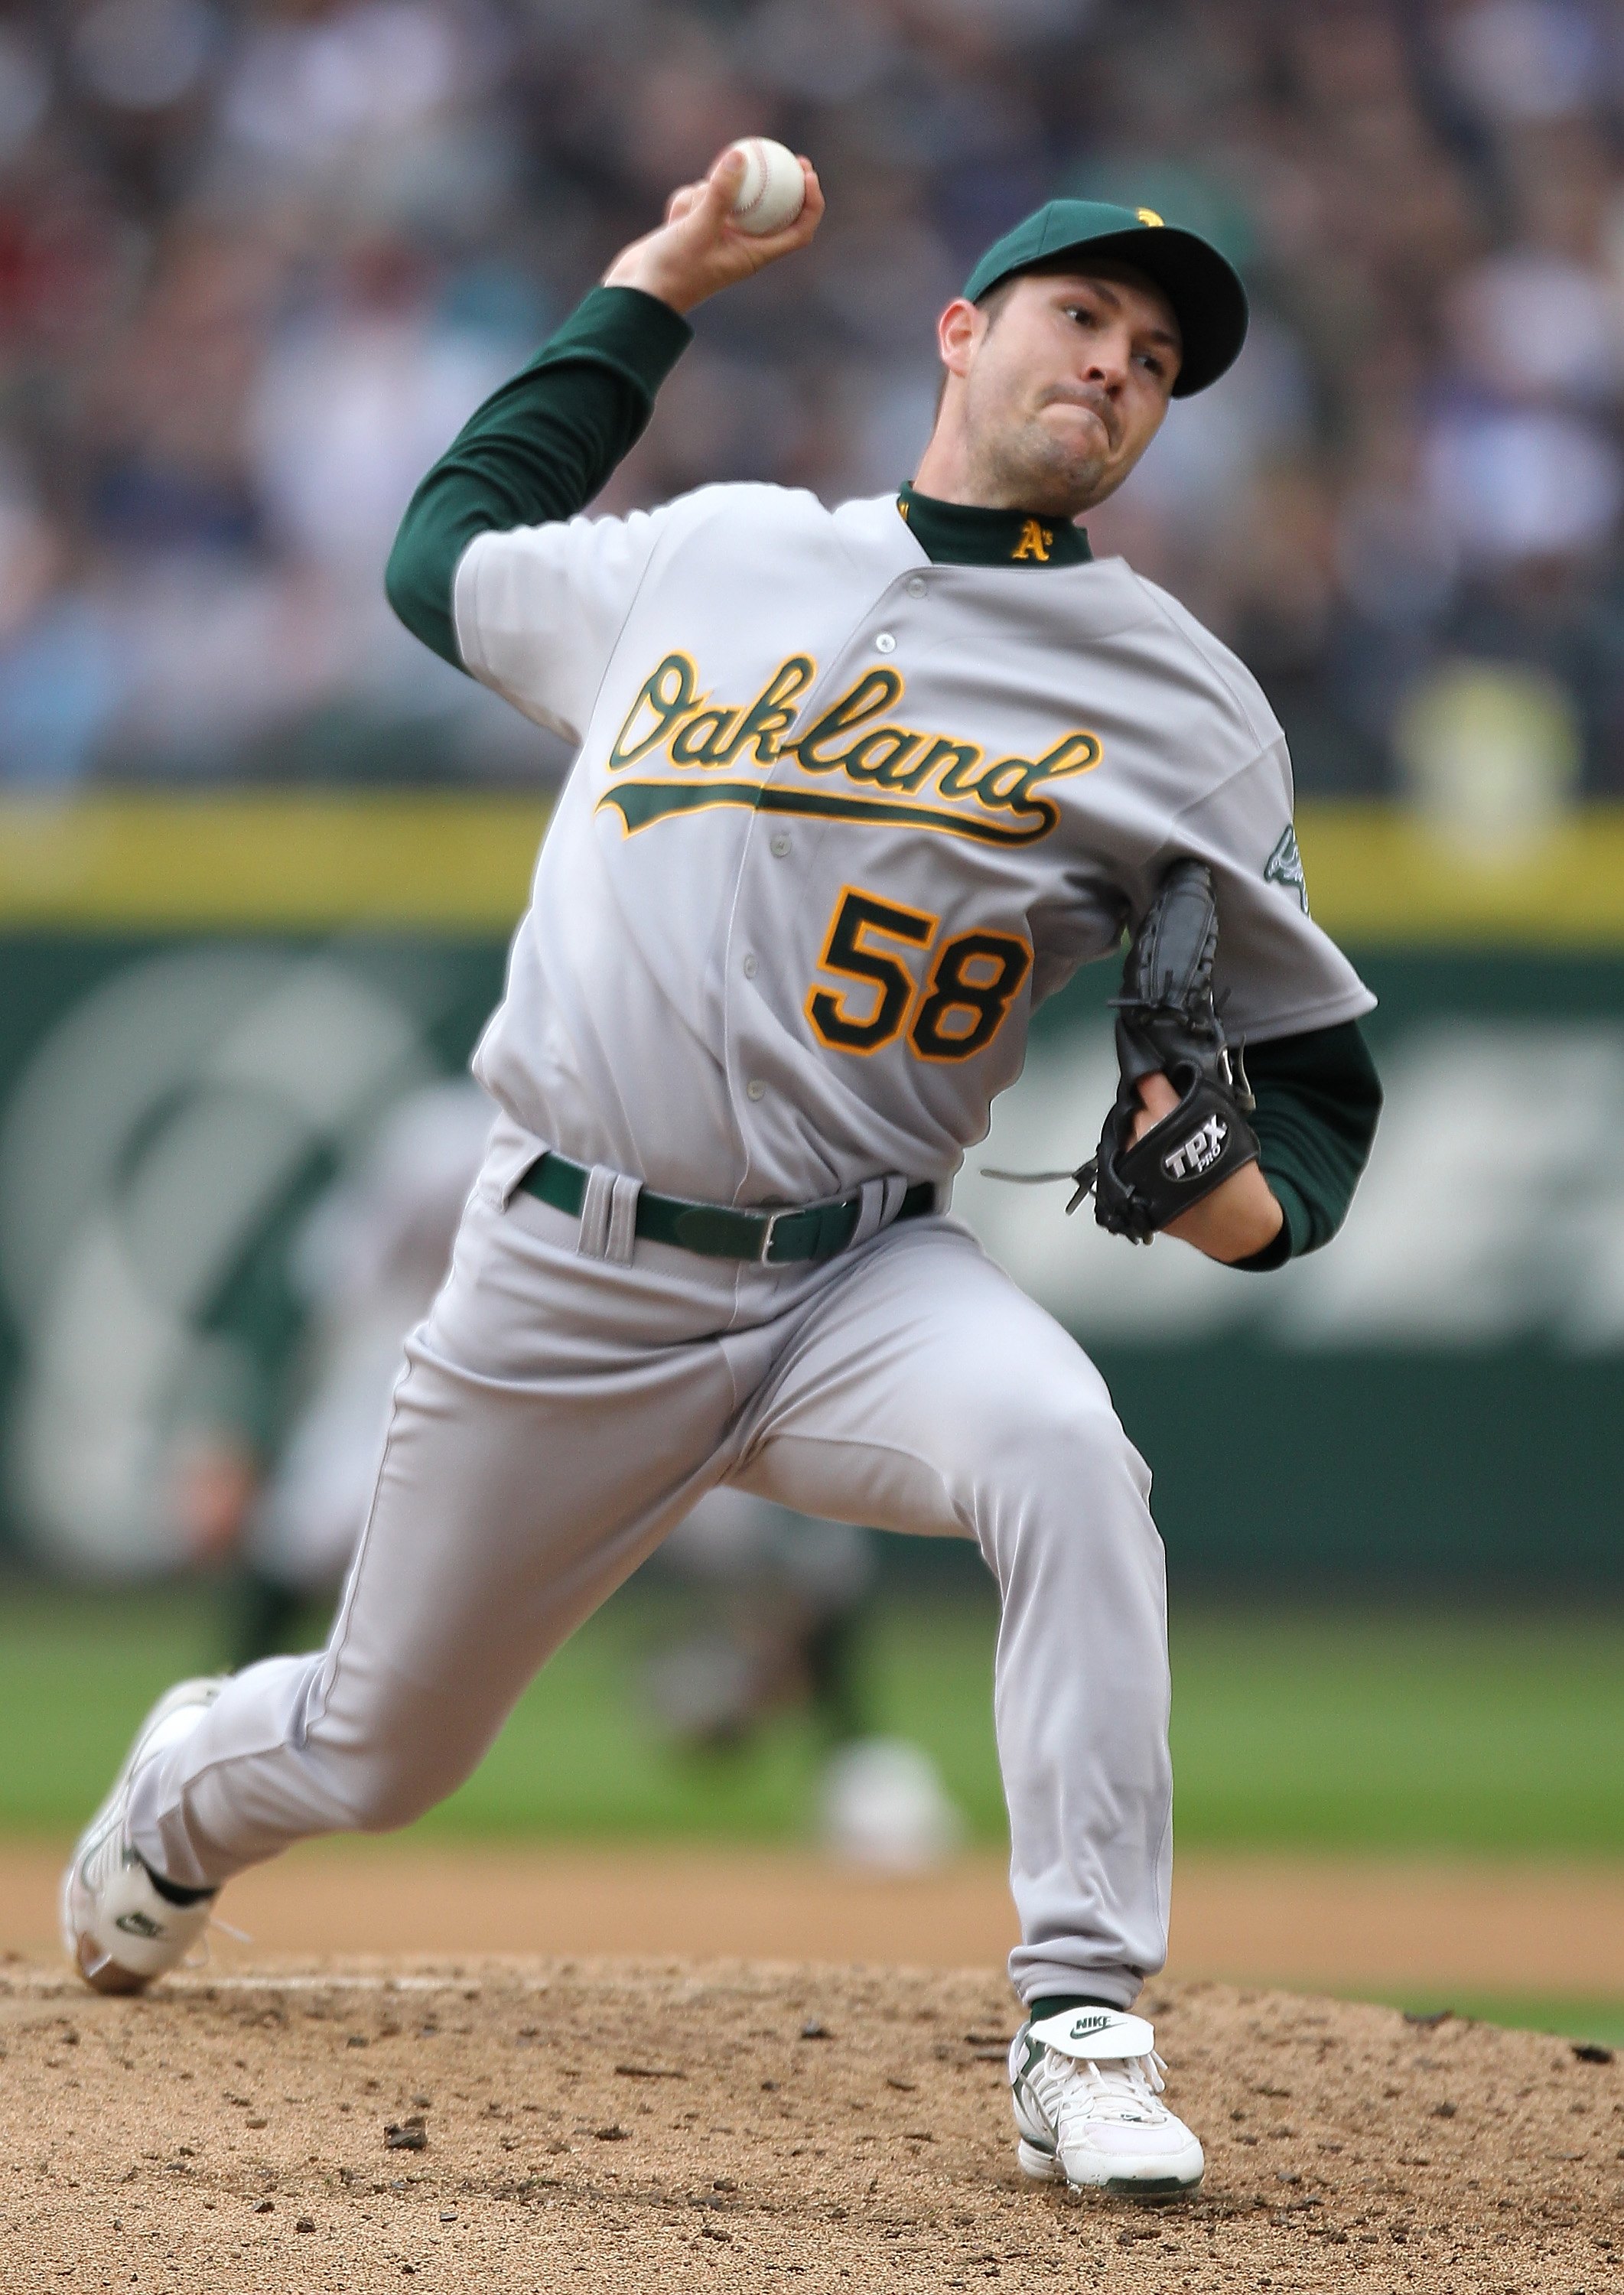 SEATTLE - APRIL 12:  Starting pitcher Justin Duchscherer #58 of the the Oakland Athletics pitches against the Seattle Mariners during the Mariners' home opener at Safeco Field on April 12, 2010 in Seattle, Washington. (Photo by Otto Greule Jr/Getty Images